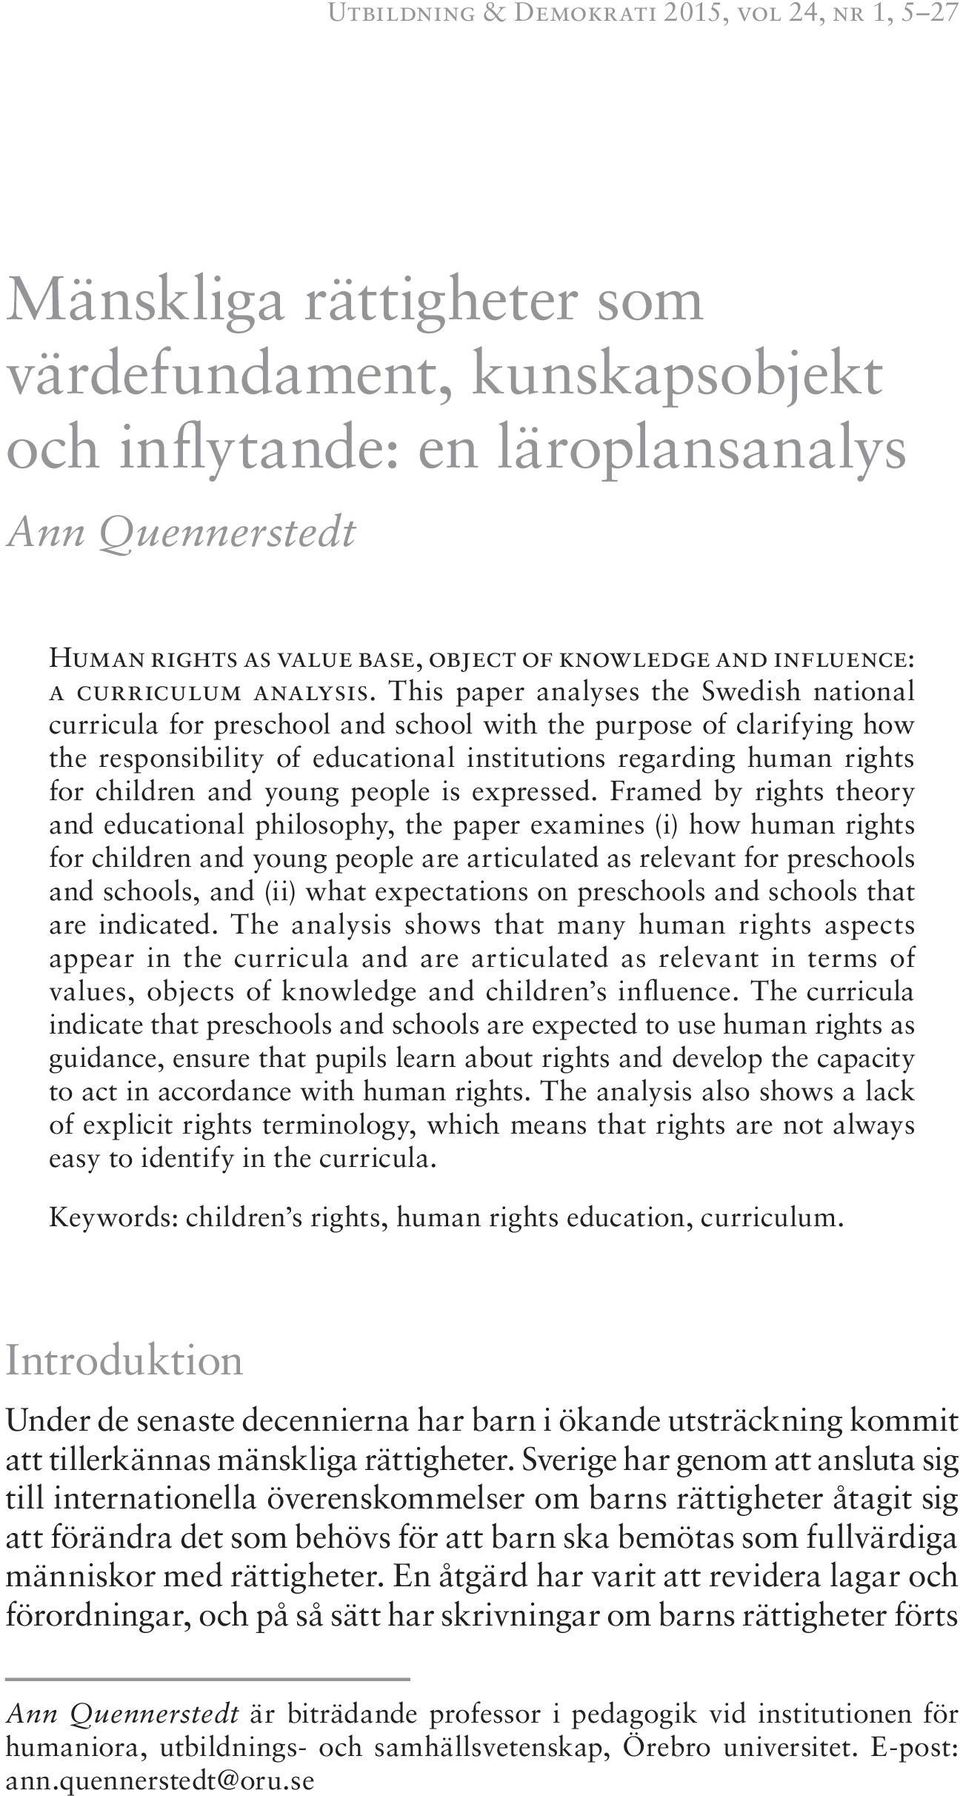 This paper analyses the Swedish national curricula for preschool and school with the purpose of clarifying how the responsibility of educational institutions regarding human rights for children and